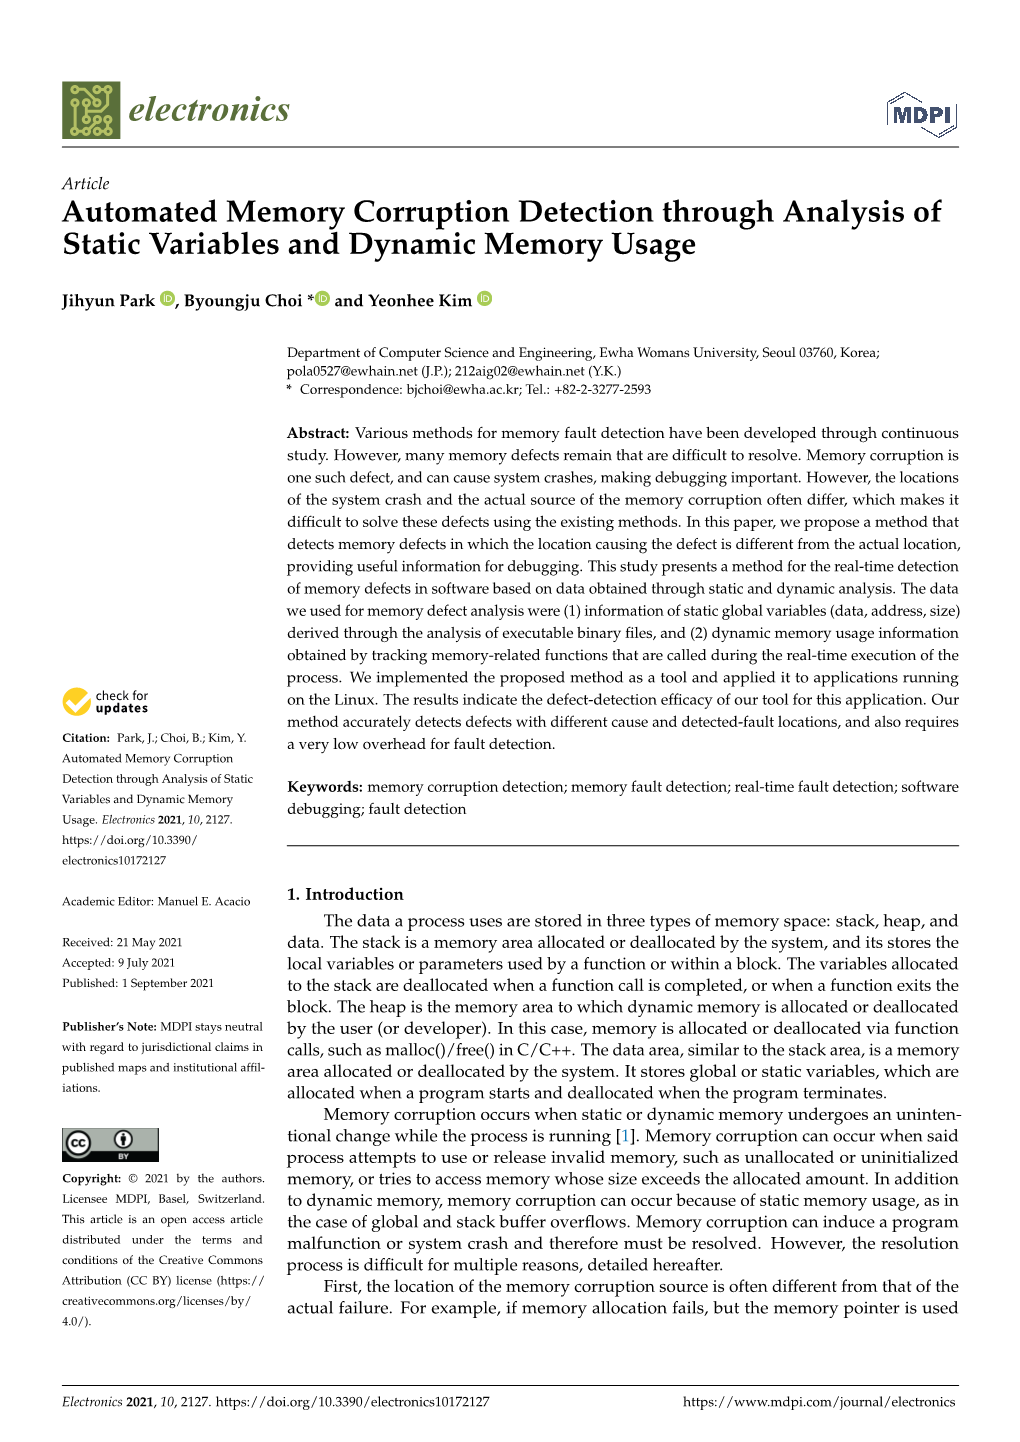 Automated Memory Corruption Detection Through Analysis of Static Variables and Dynamic Memory Usage